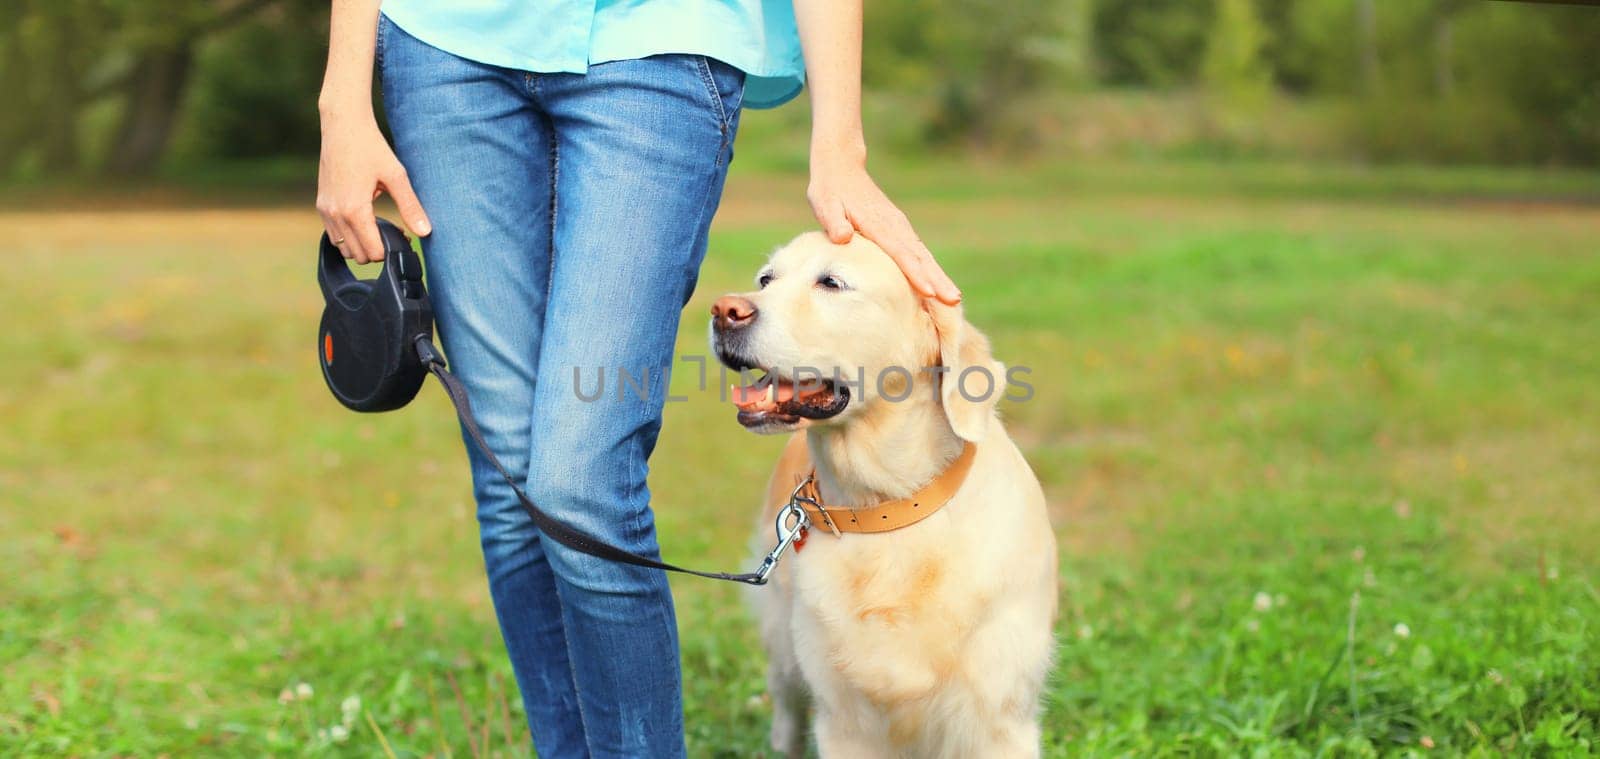 Owner woman walking with her Golden Retriever dog on leash in summer park